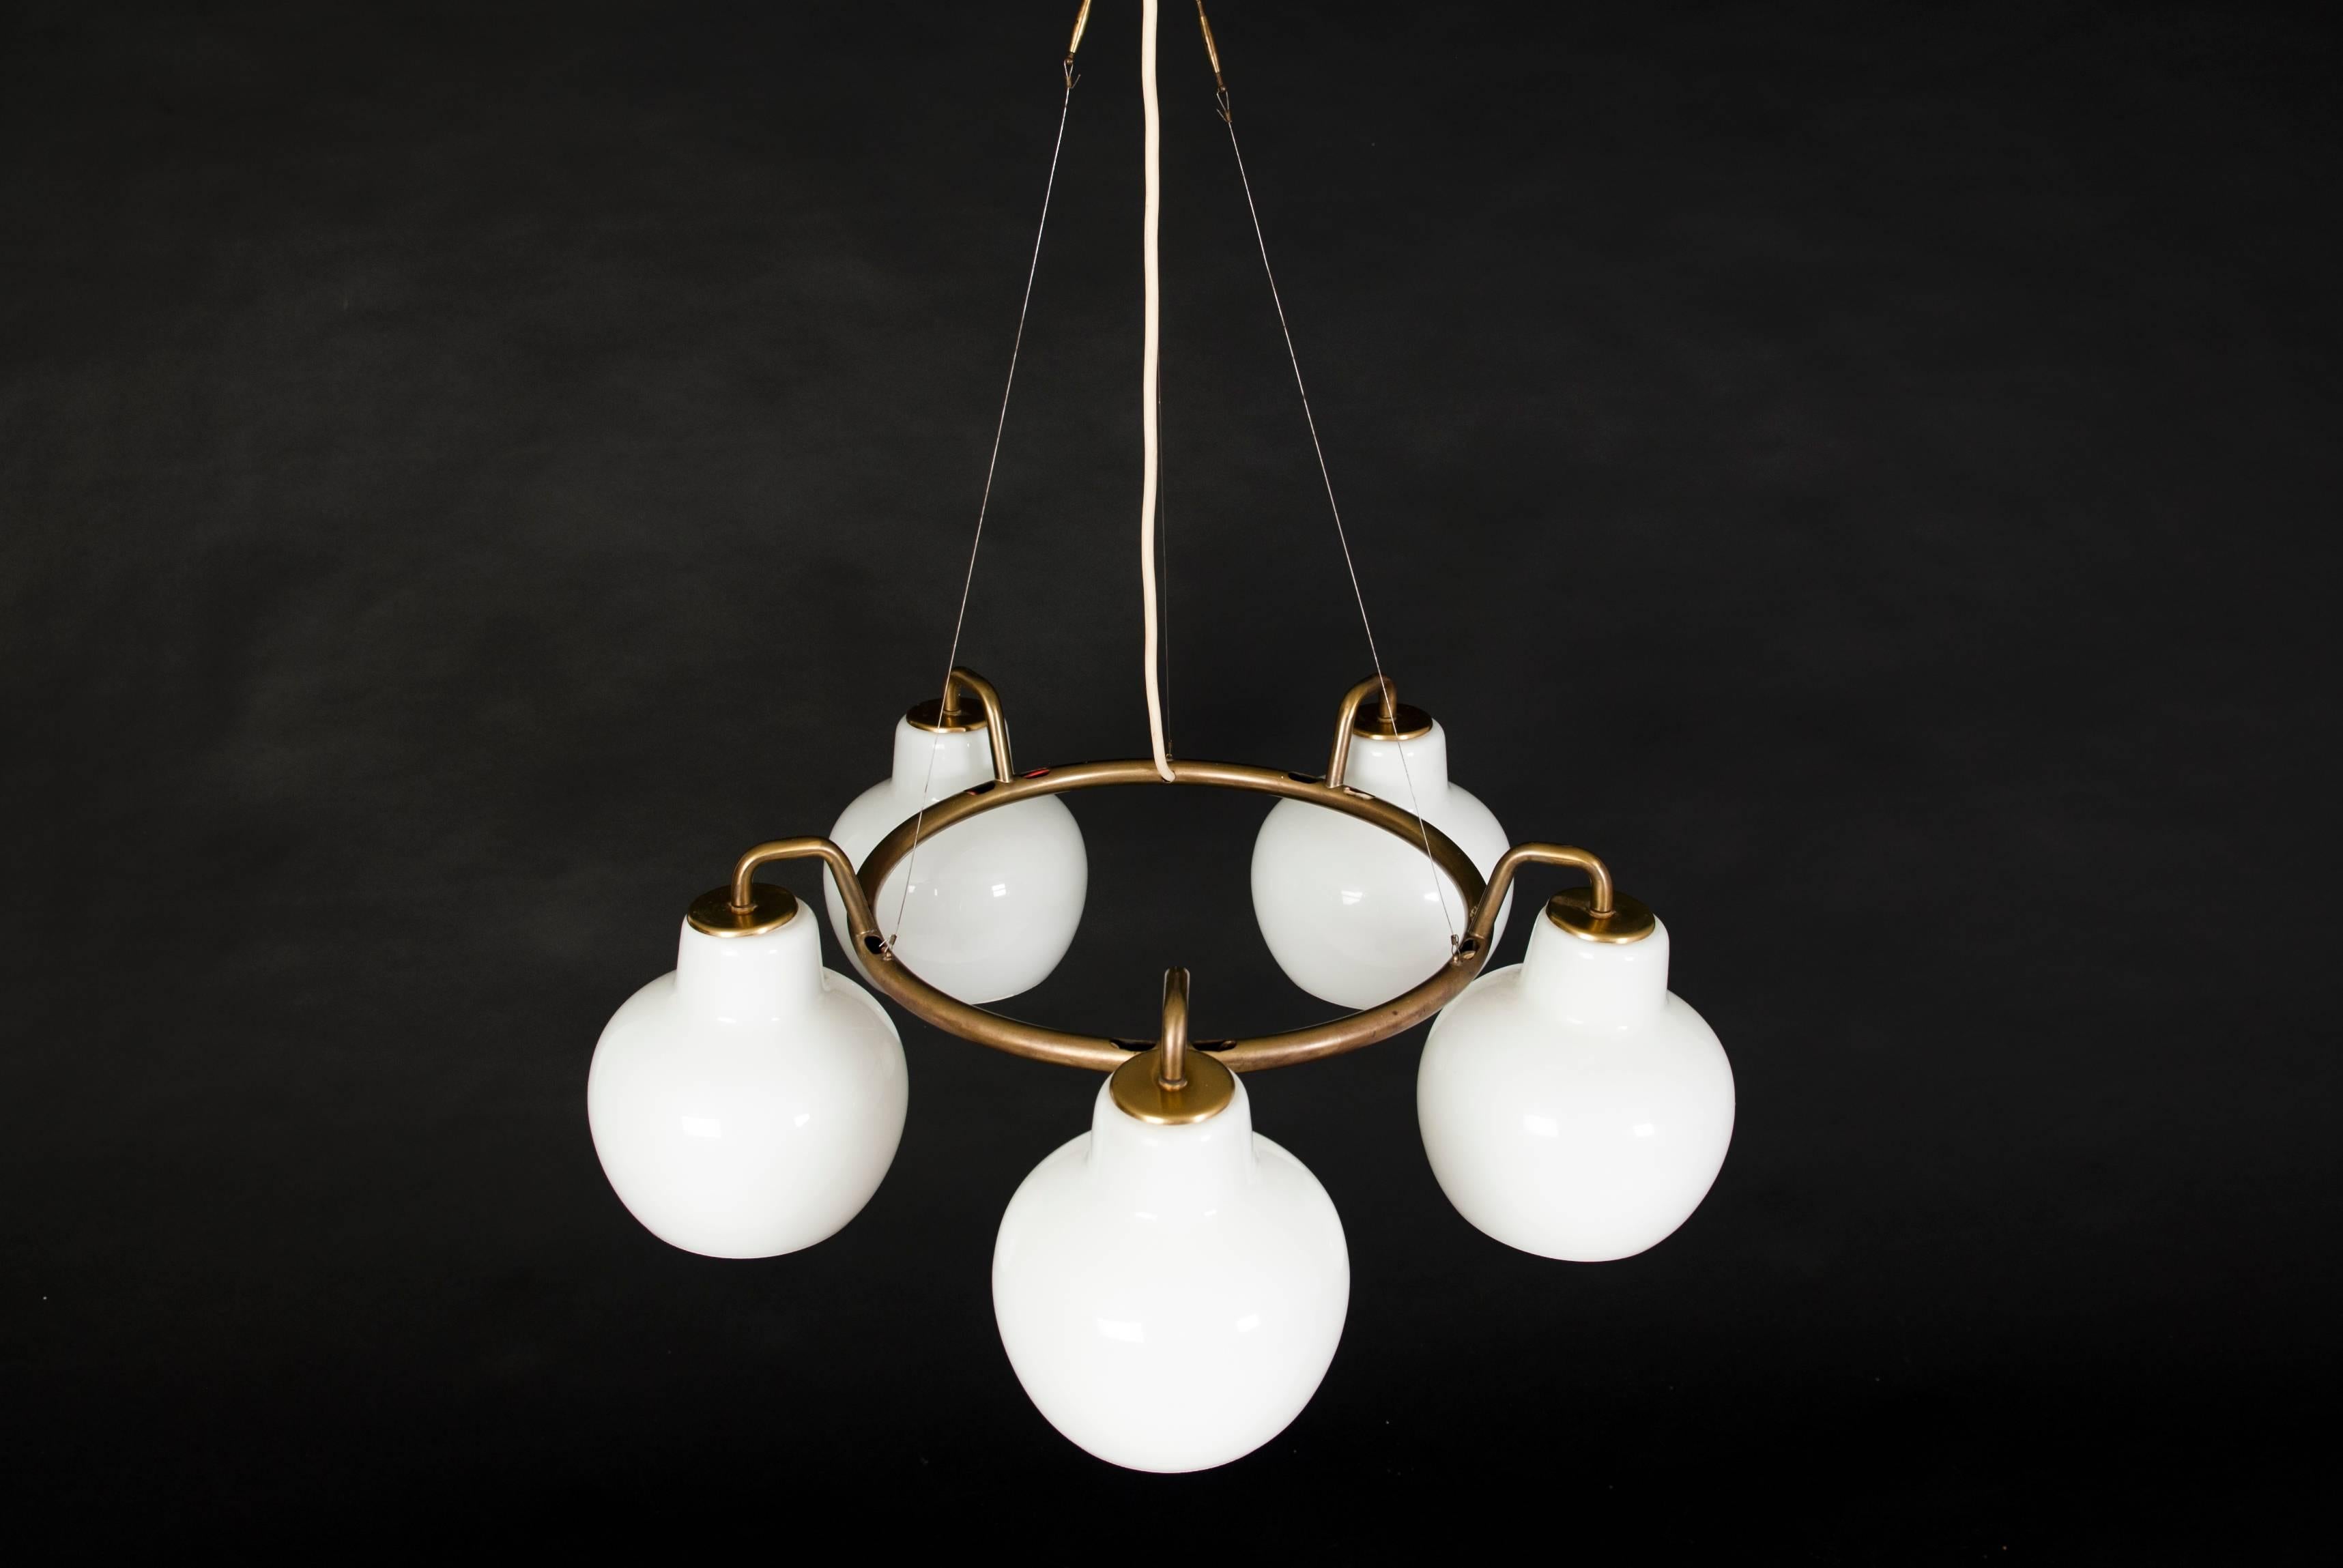 Vilhelm Lauritzen.

Christiansborg chandelier. Brass ring, five branches with shades of multi-layer opal glass. 

Manufactured by Louis Poulsen.
 